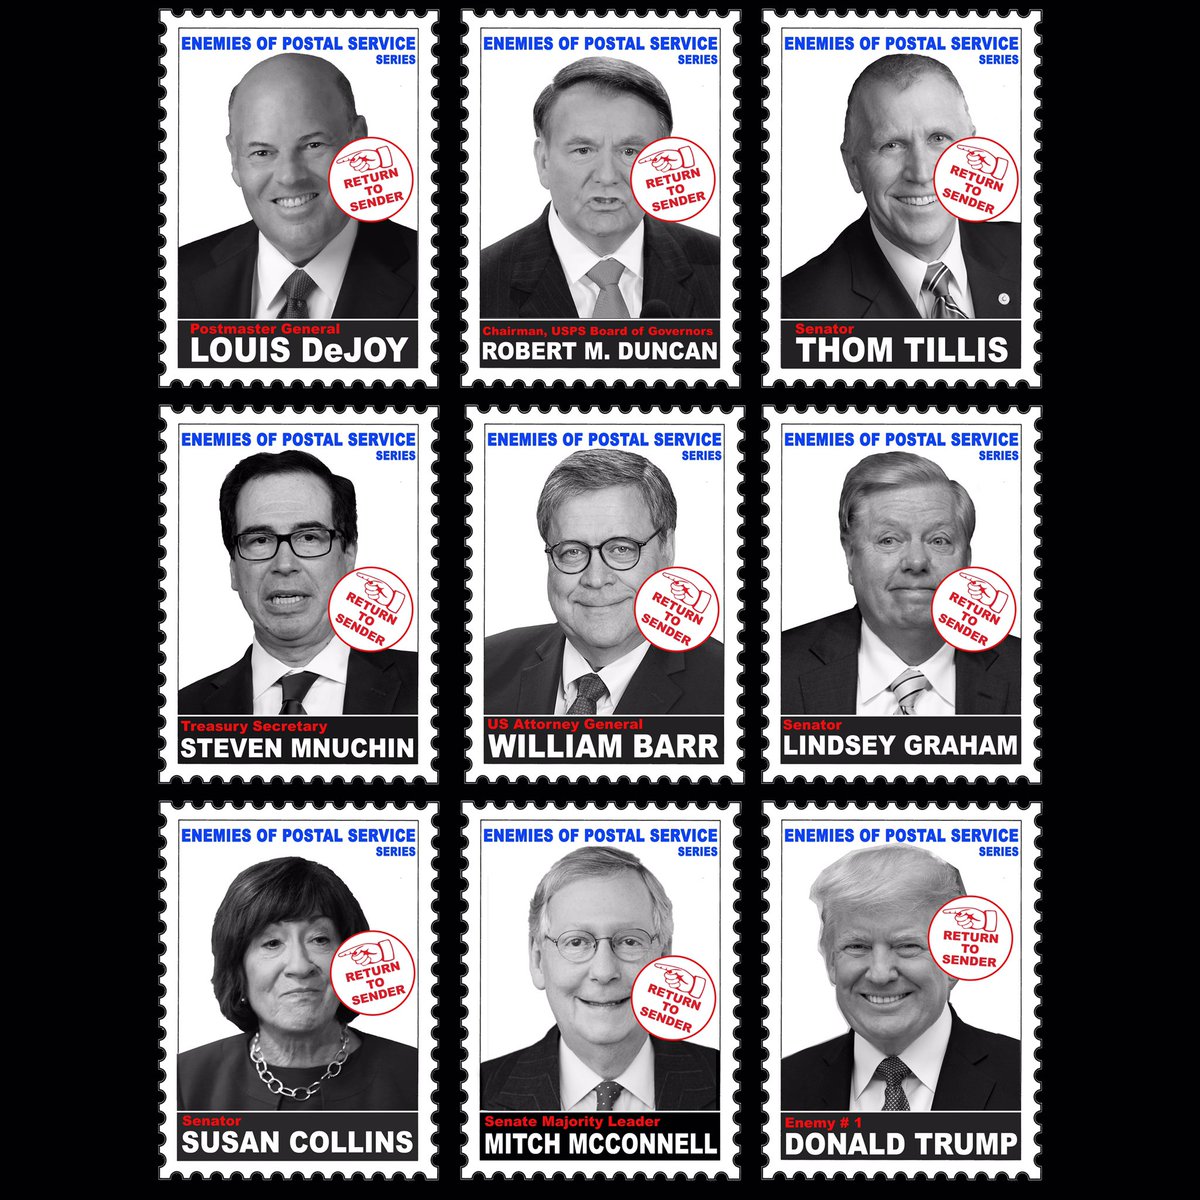 Click on the images to see our new series of stamps: Enemies of the Postal Service. Collect them all. Then throw them in the trash heap of history!  #SaveThePostOffice  #Vote2020   /1